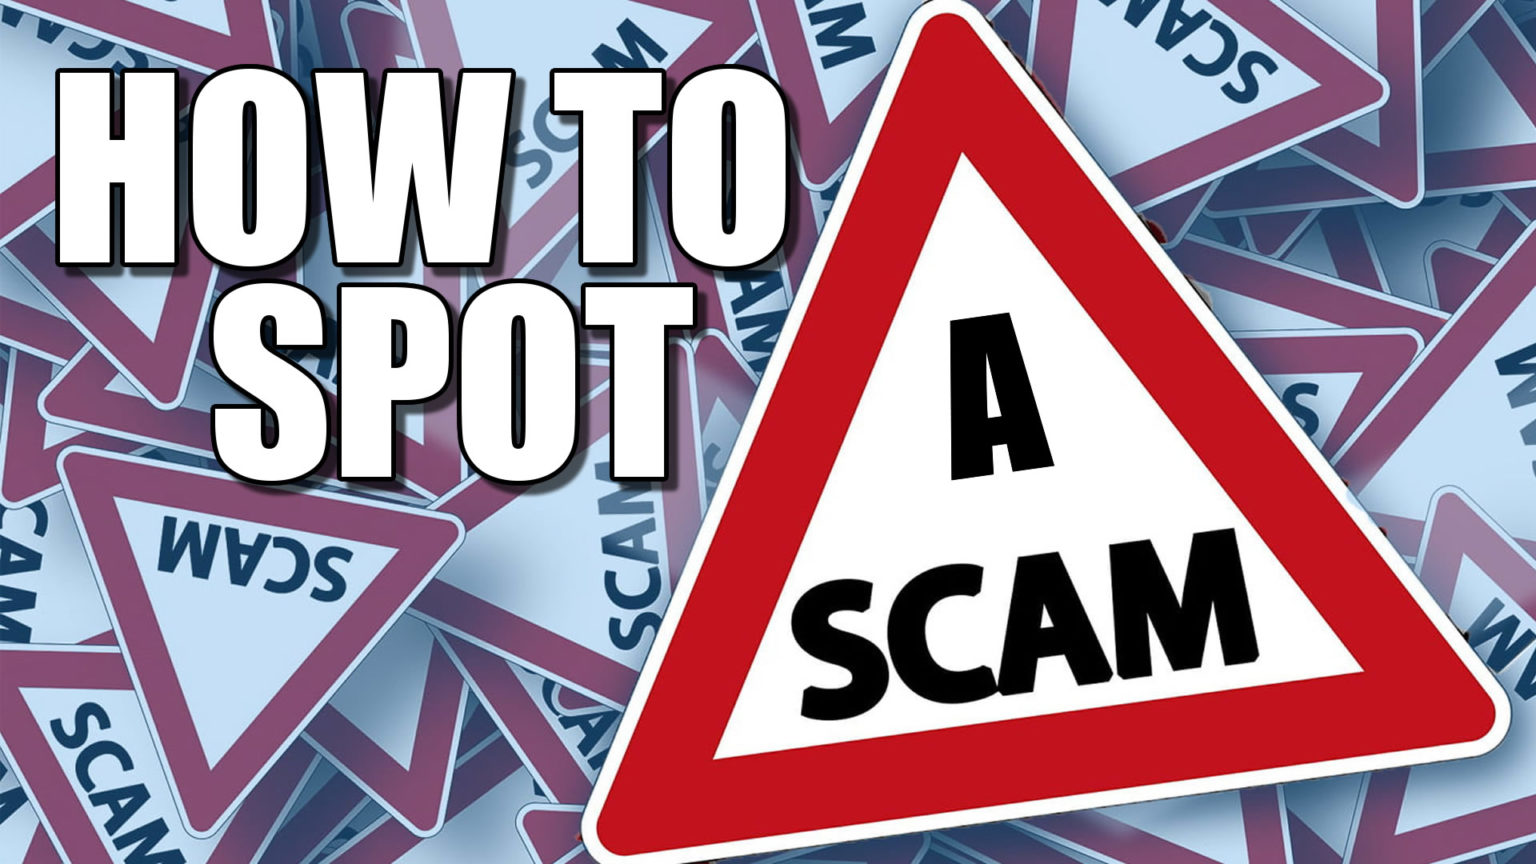 How to spot a scam in 2021 {VLOG} - NJ Route 22